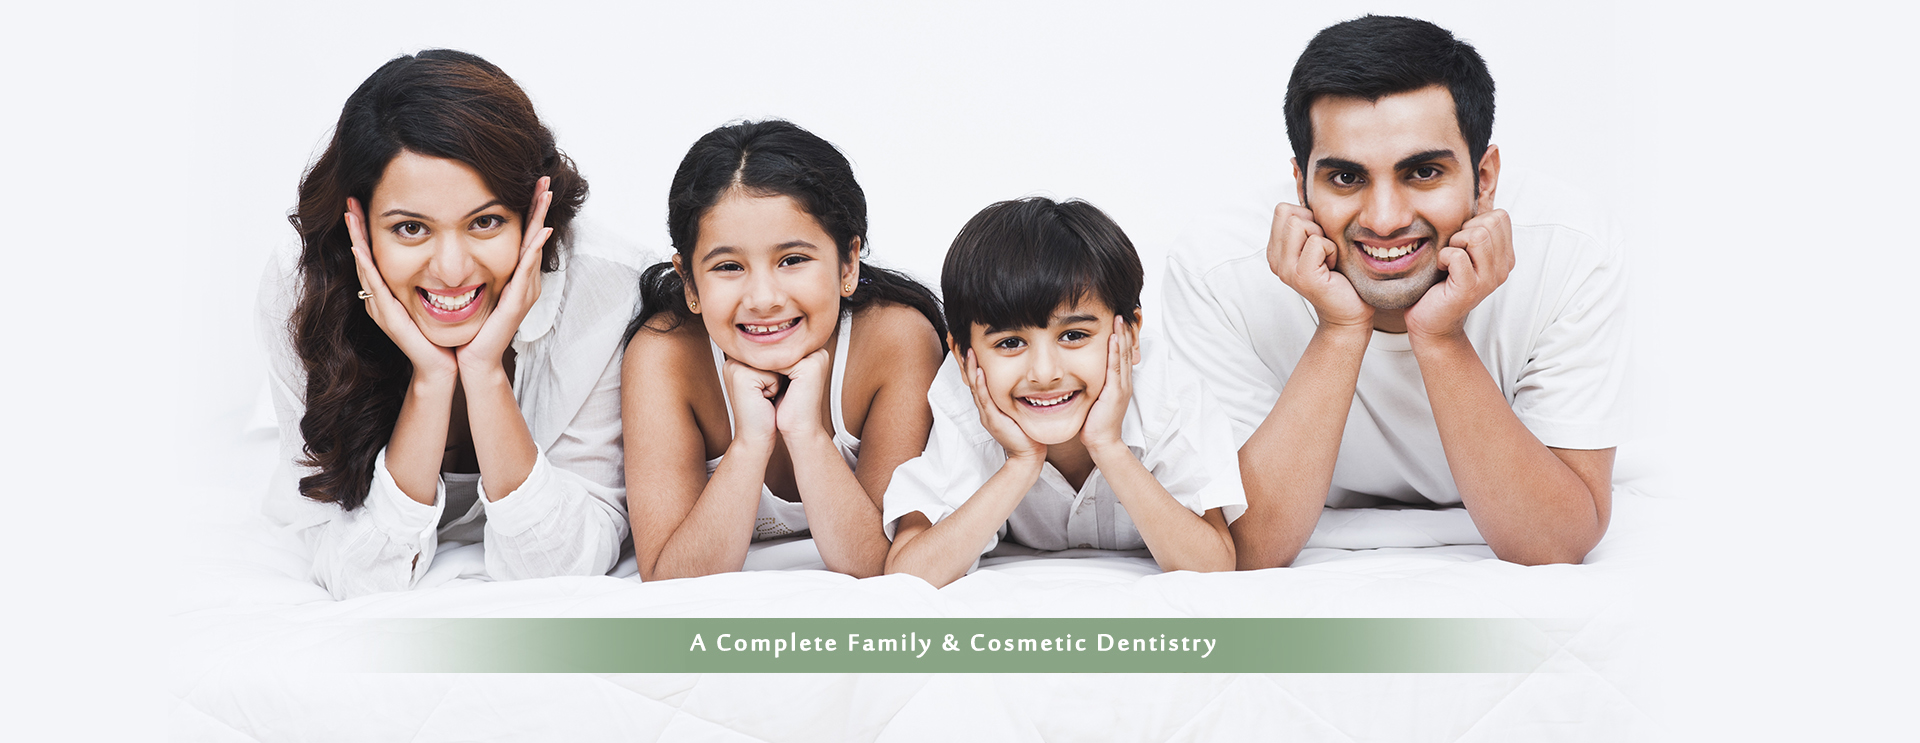 Complete Family and Cosmetic Dentistry